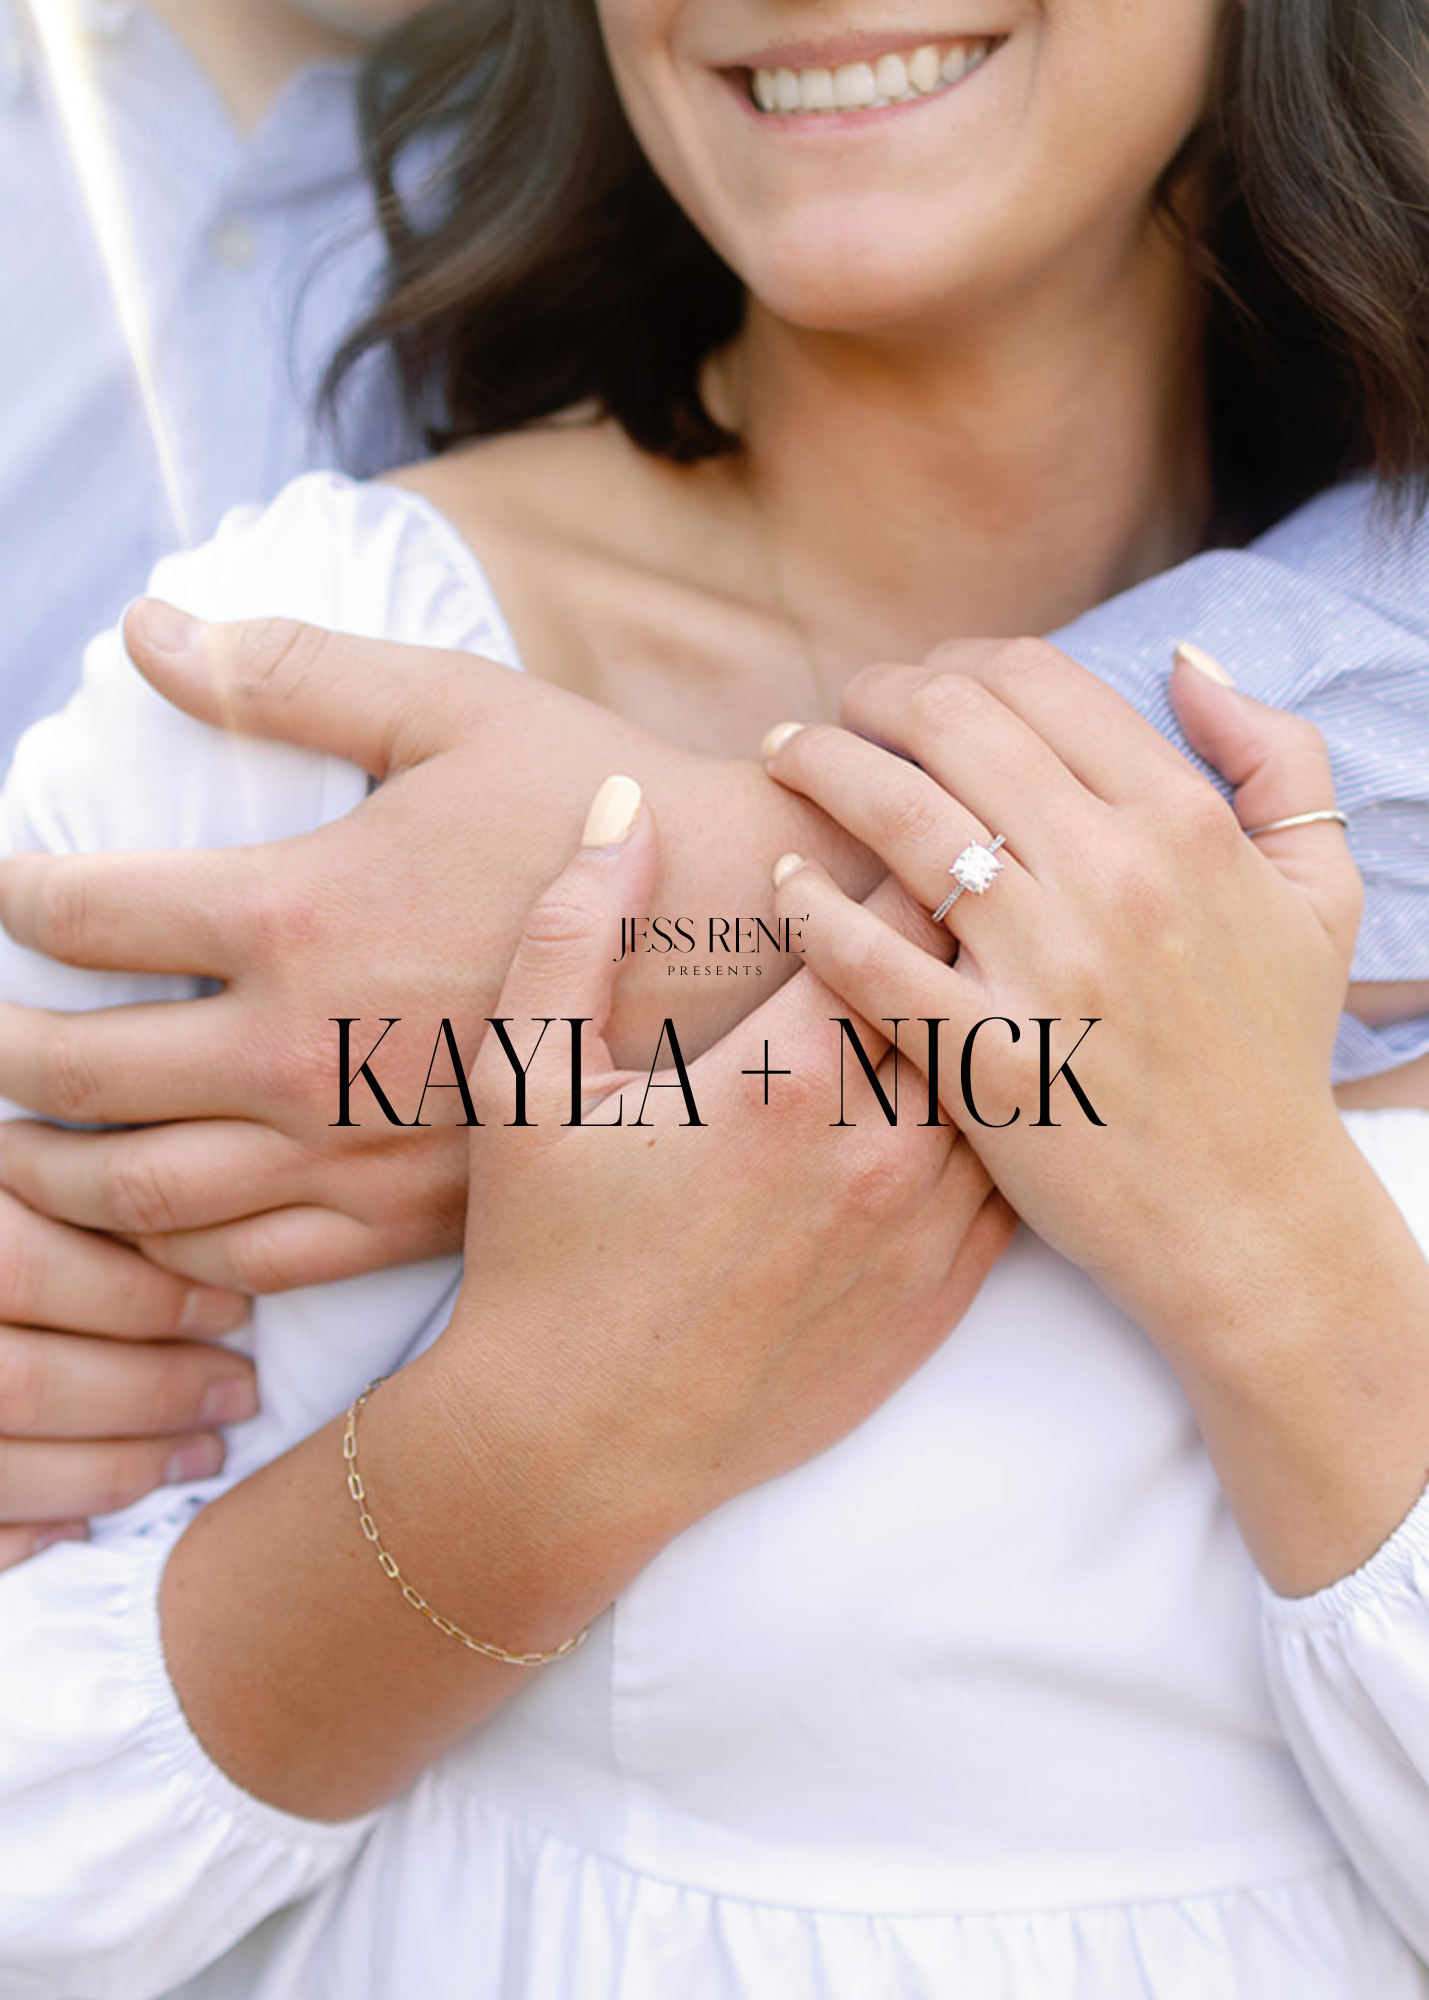 Couple holding hands up close with engagement ring showing.